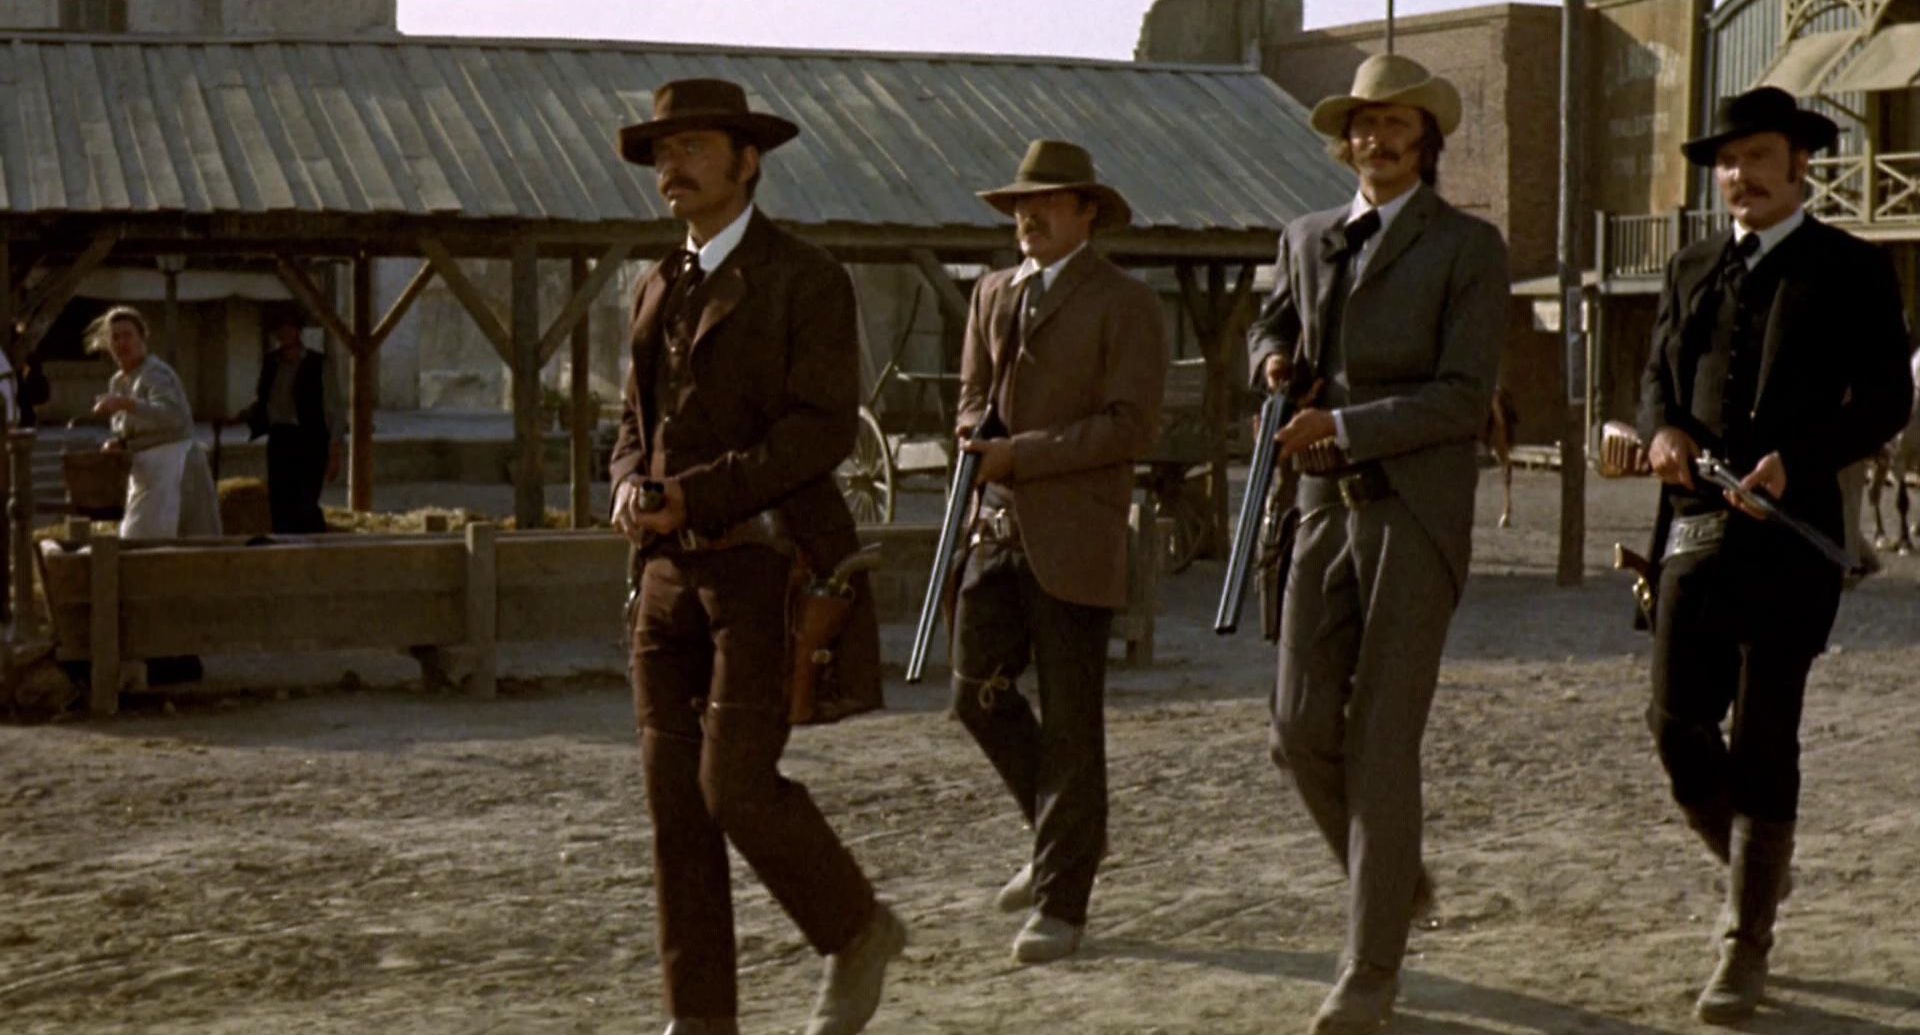 The Earp brothers, along with Doc Holliday, march through Tombstone heavily armed.